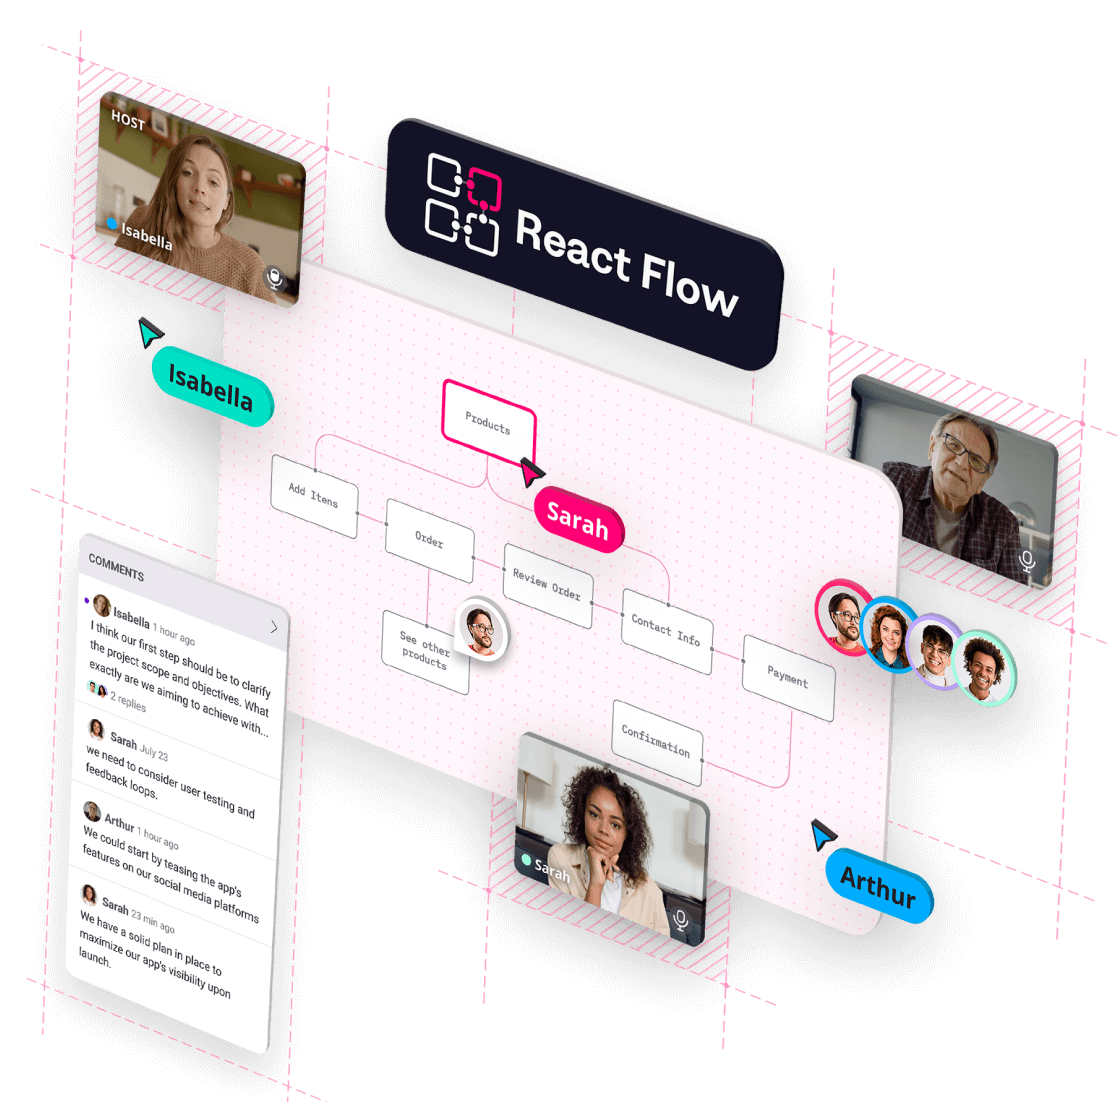 A SuperViz for React Flow interface shows a collaborative flowchart with nodes like Products, Add Items, and Order. Participants Isabella, Sarah, and Arthur are on video calls, with their names and avatars pointing to their locations. A comments panel displays project discussions, and the SuperViz for React Flow logo is at the top